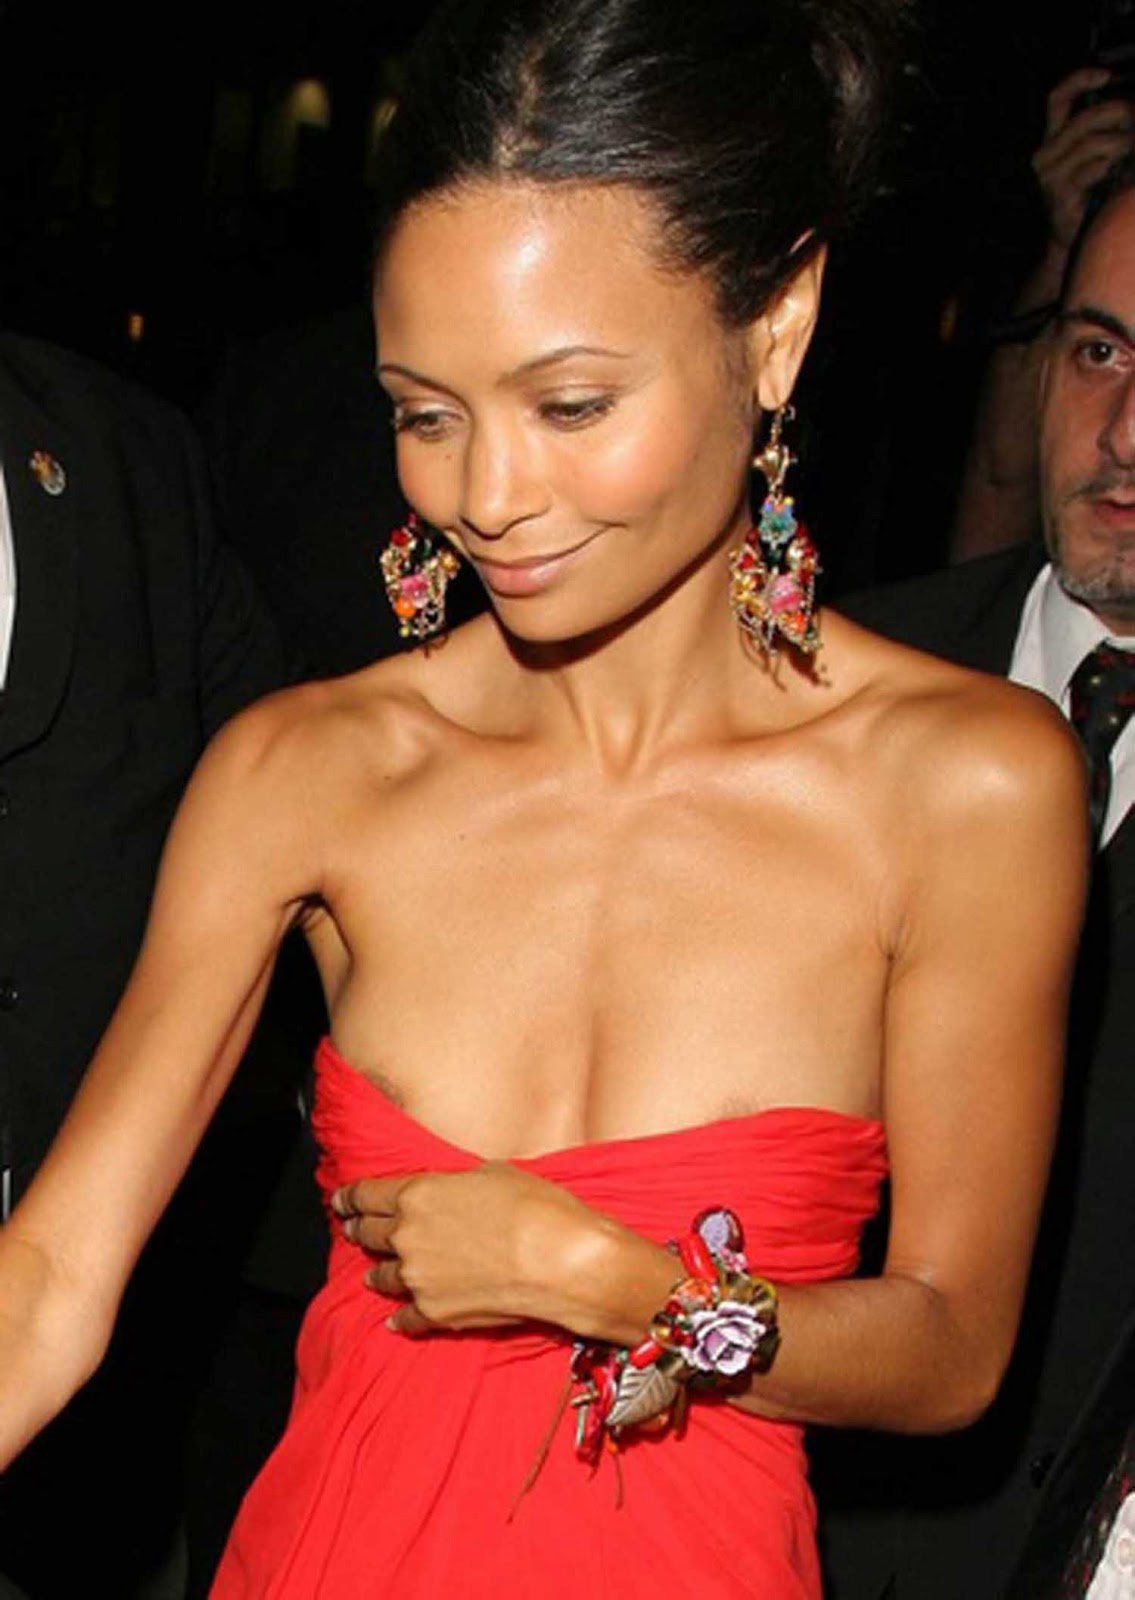 Thandie Newton ("Mission Impossible II") showing cute boobs.